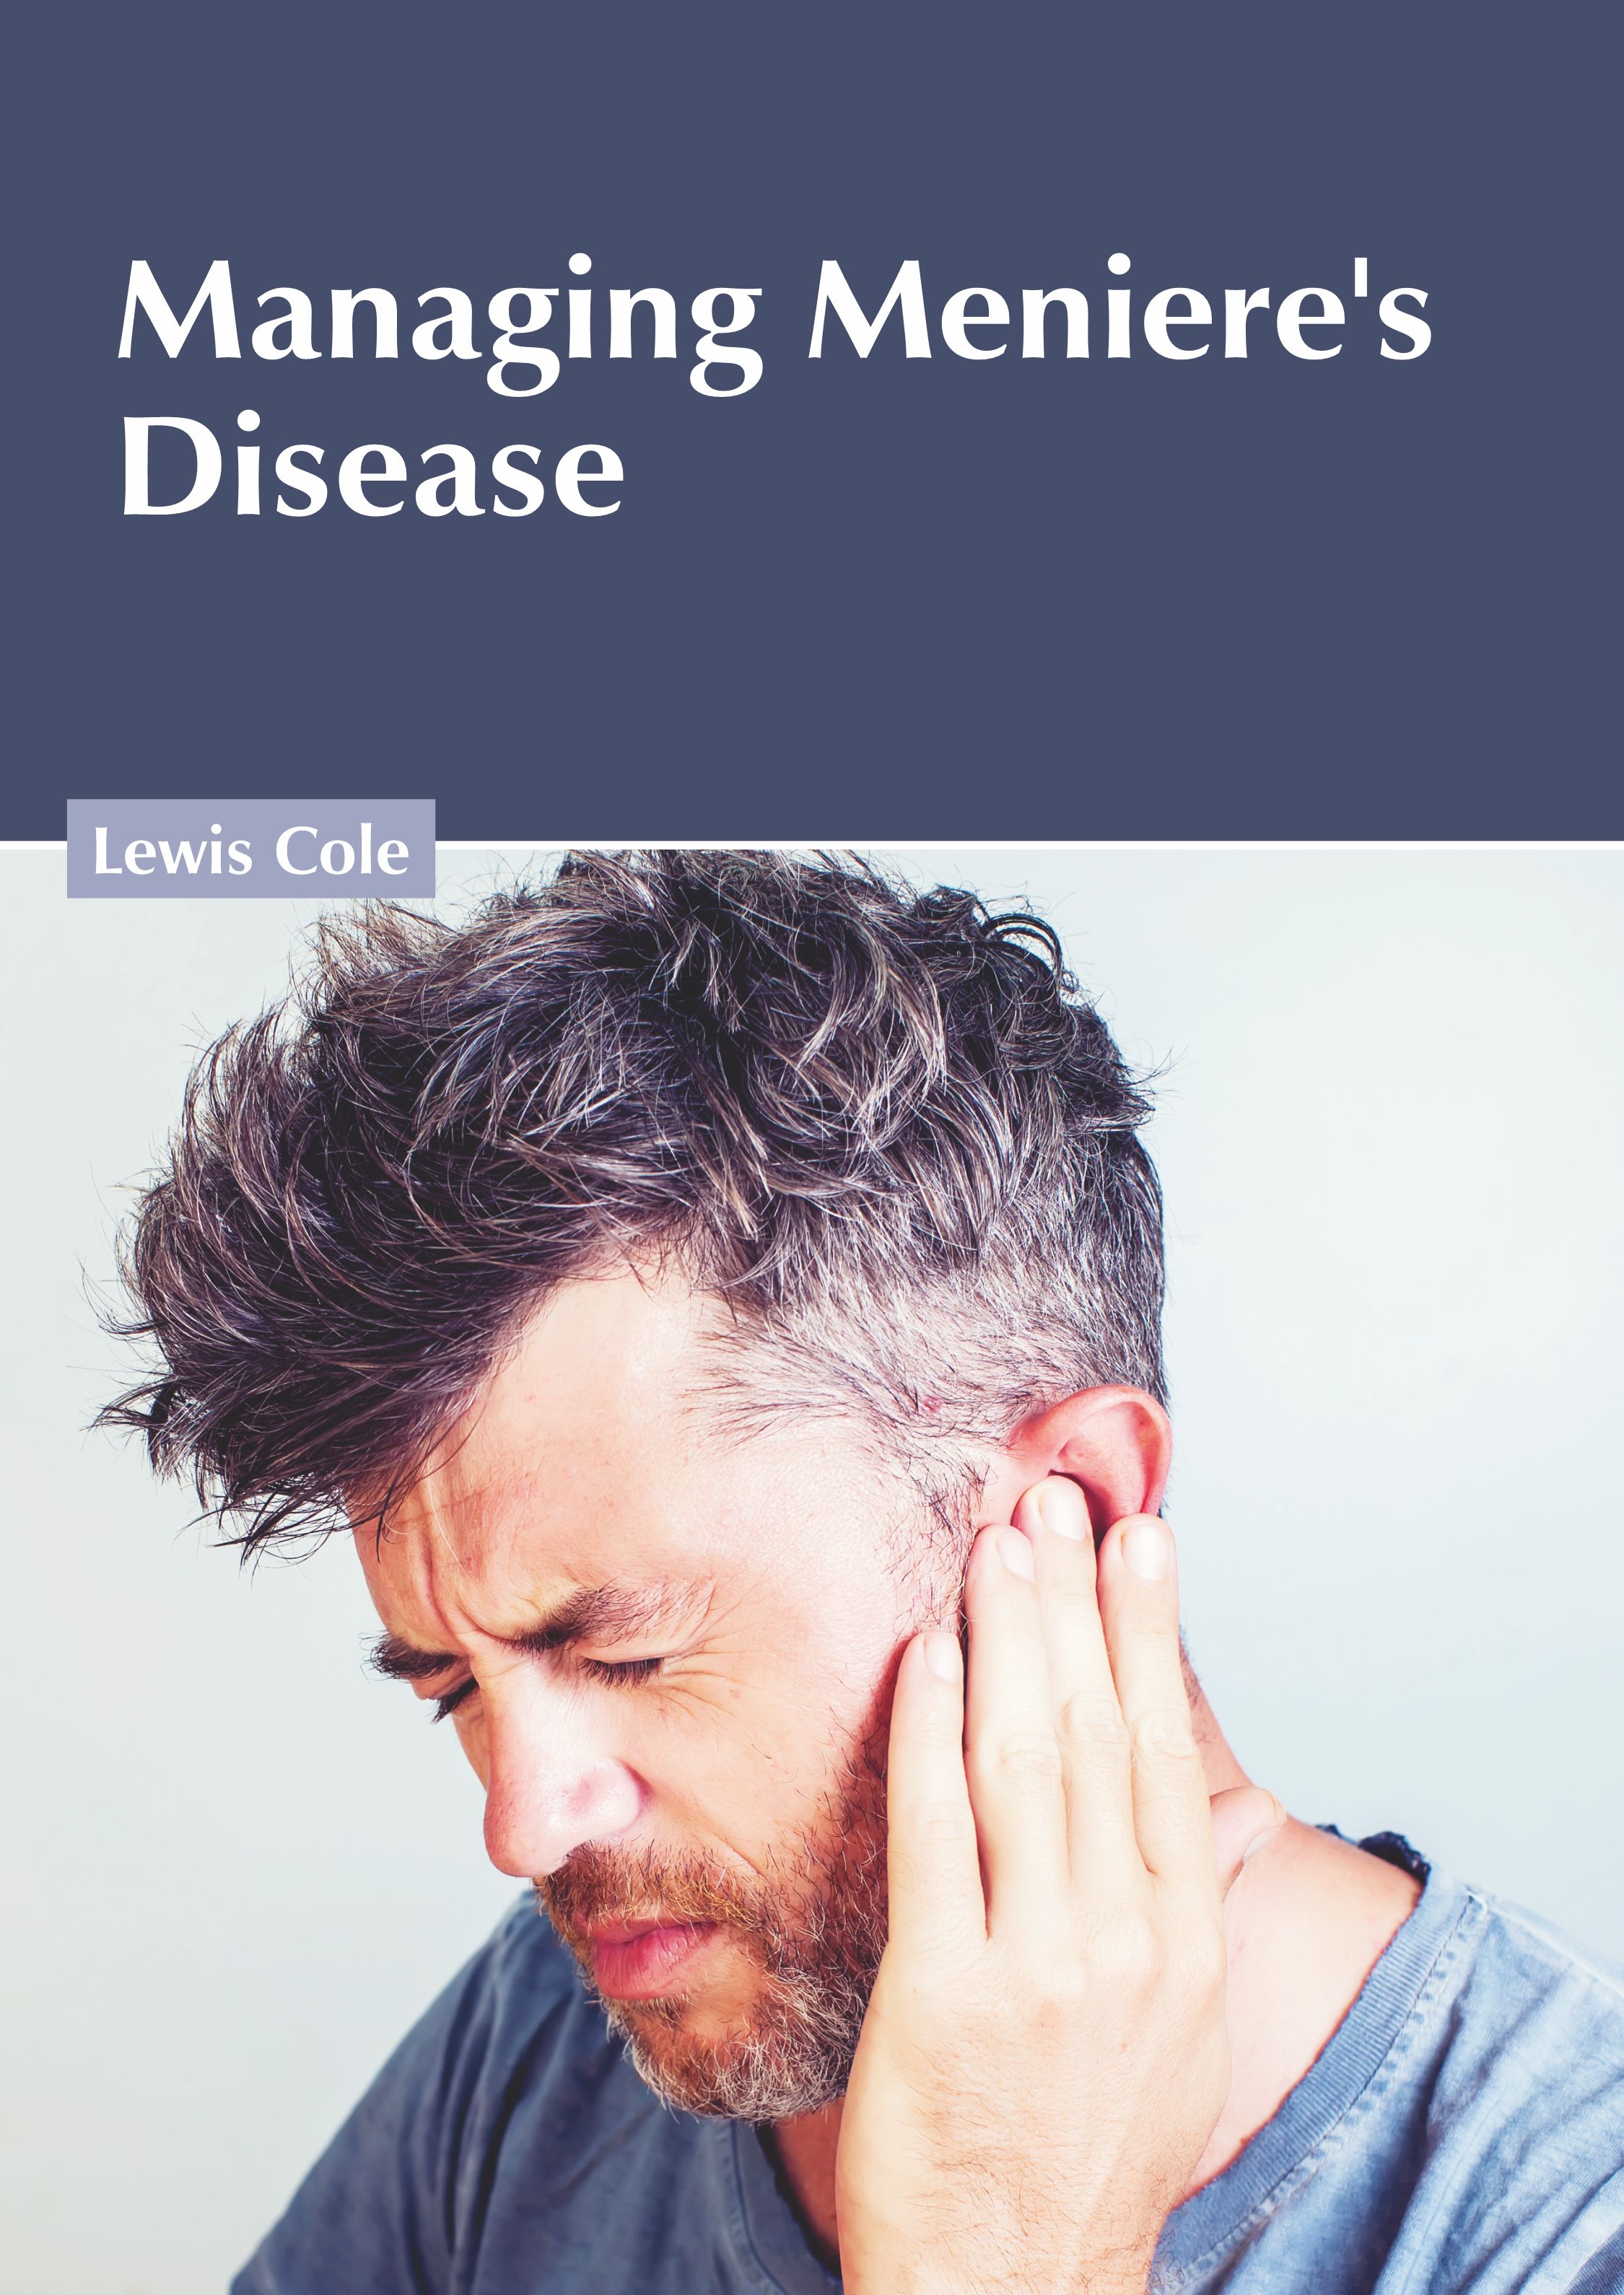 

exclusive-publishers/american-medical-publishers/managing-meniere-s-disease-9781639274116